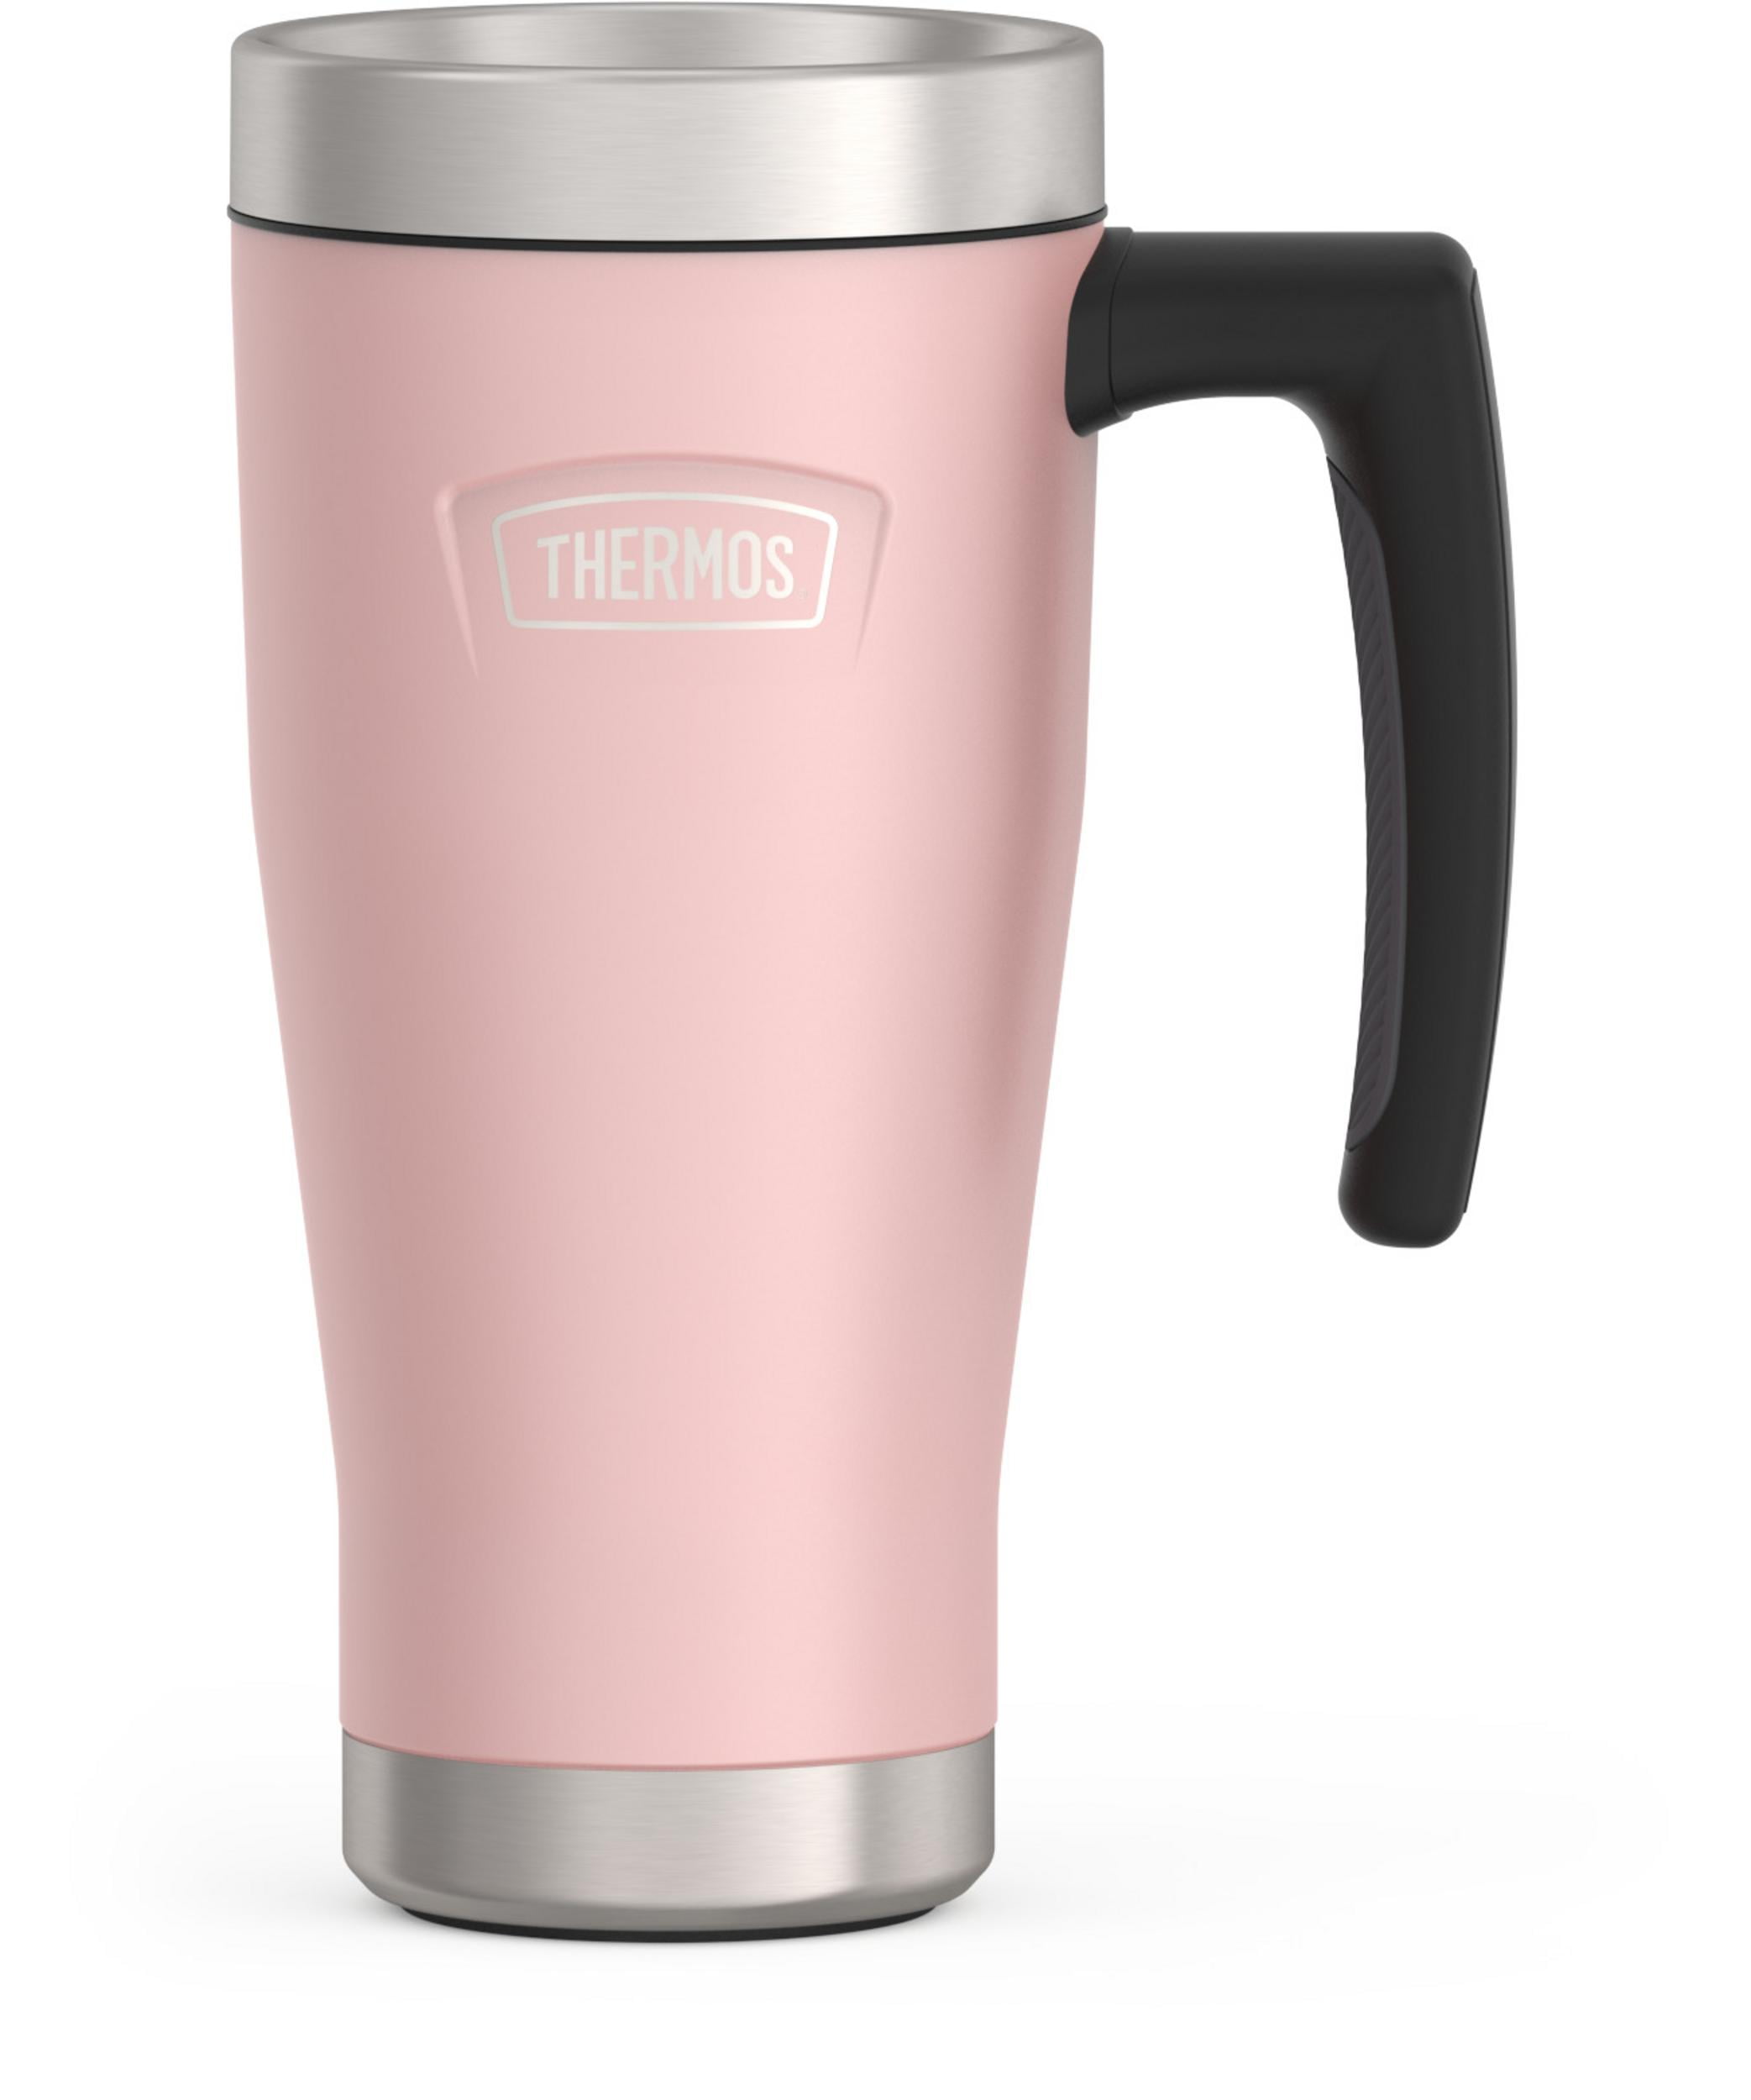 Thermos ICON Series Stainless Steel Vacuum Insulated Mug, 16oz